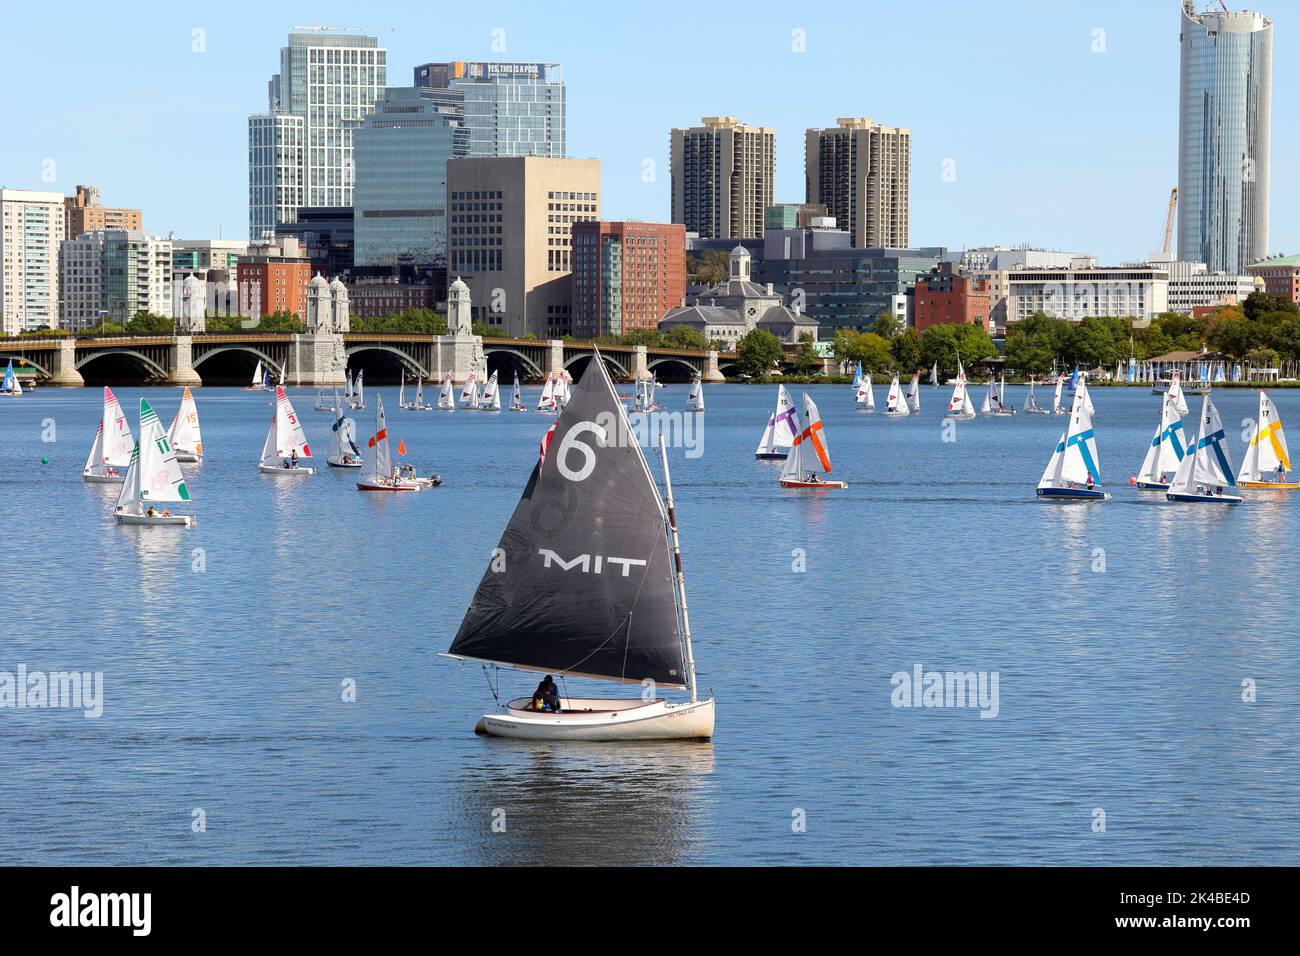 A lone MIT catboat amongst a flotilla of Boston University sailboats on the Charles River with Longfellow Bridge and Boston skyline in the background Stock Photo